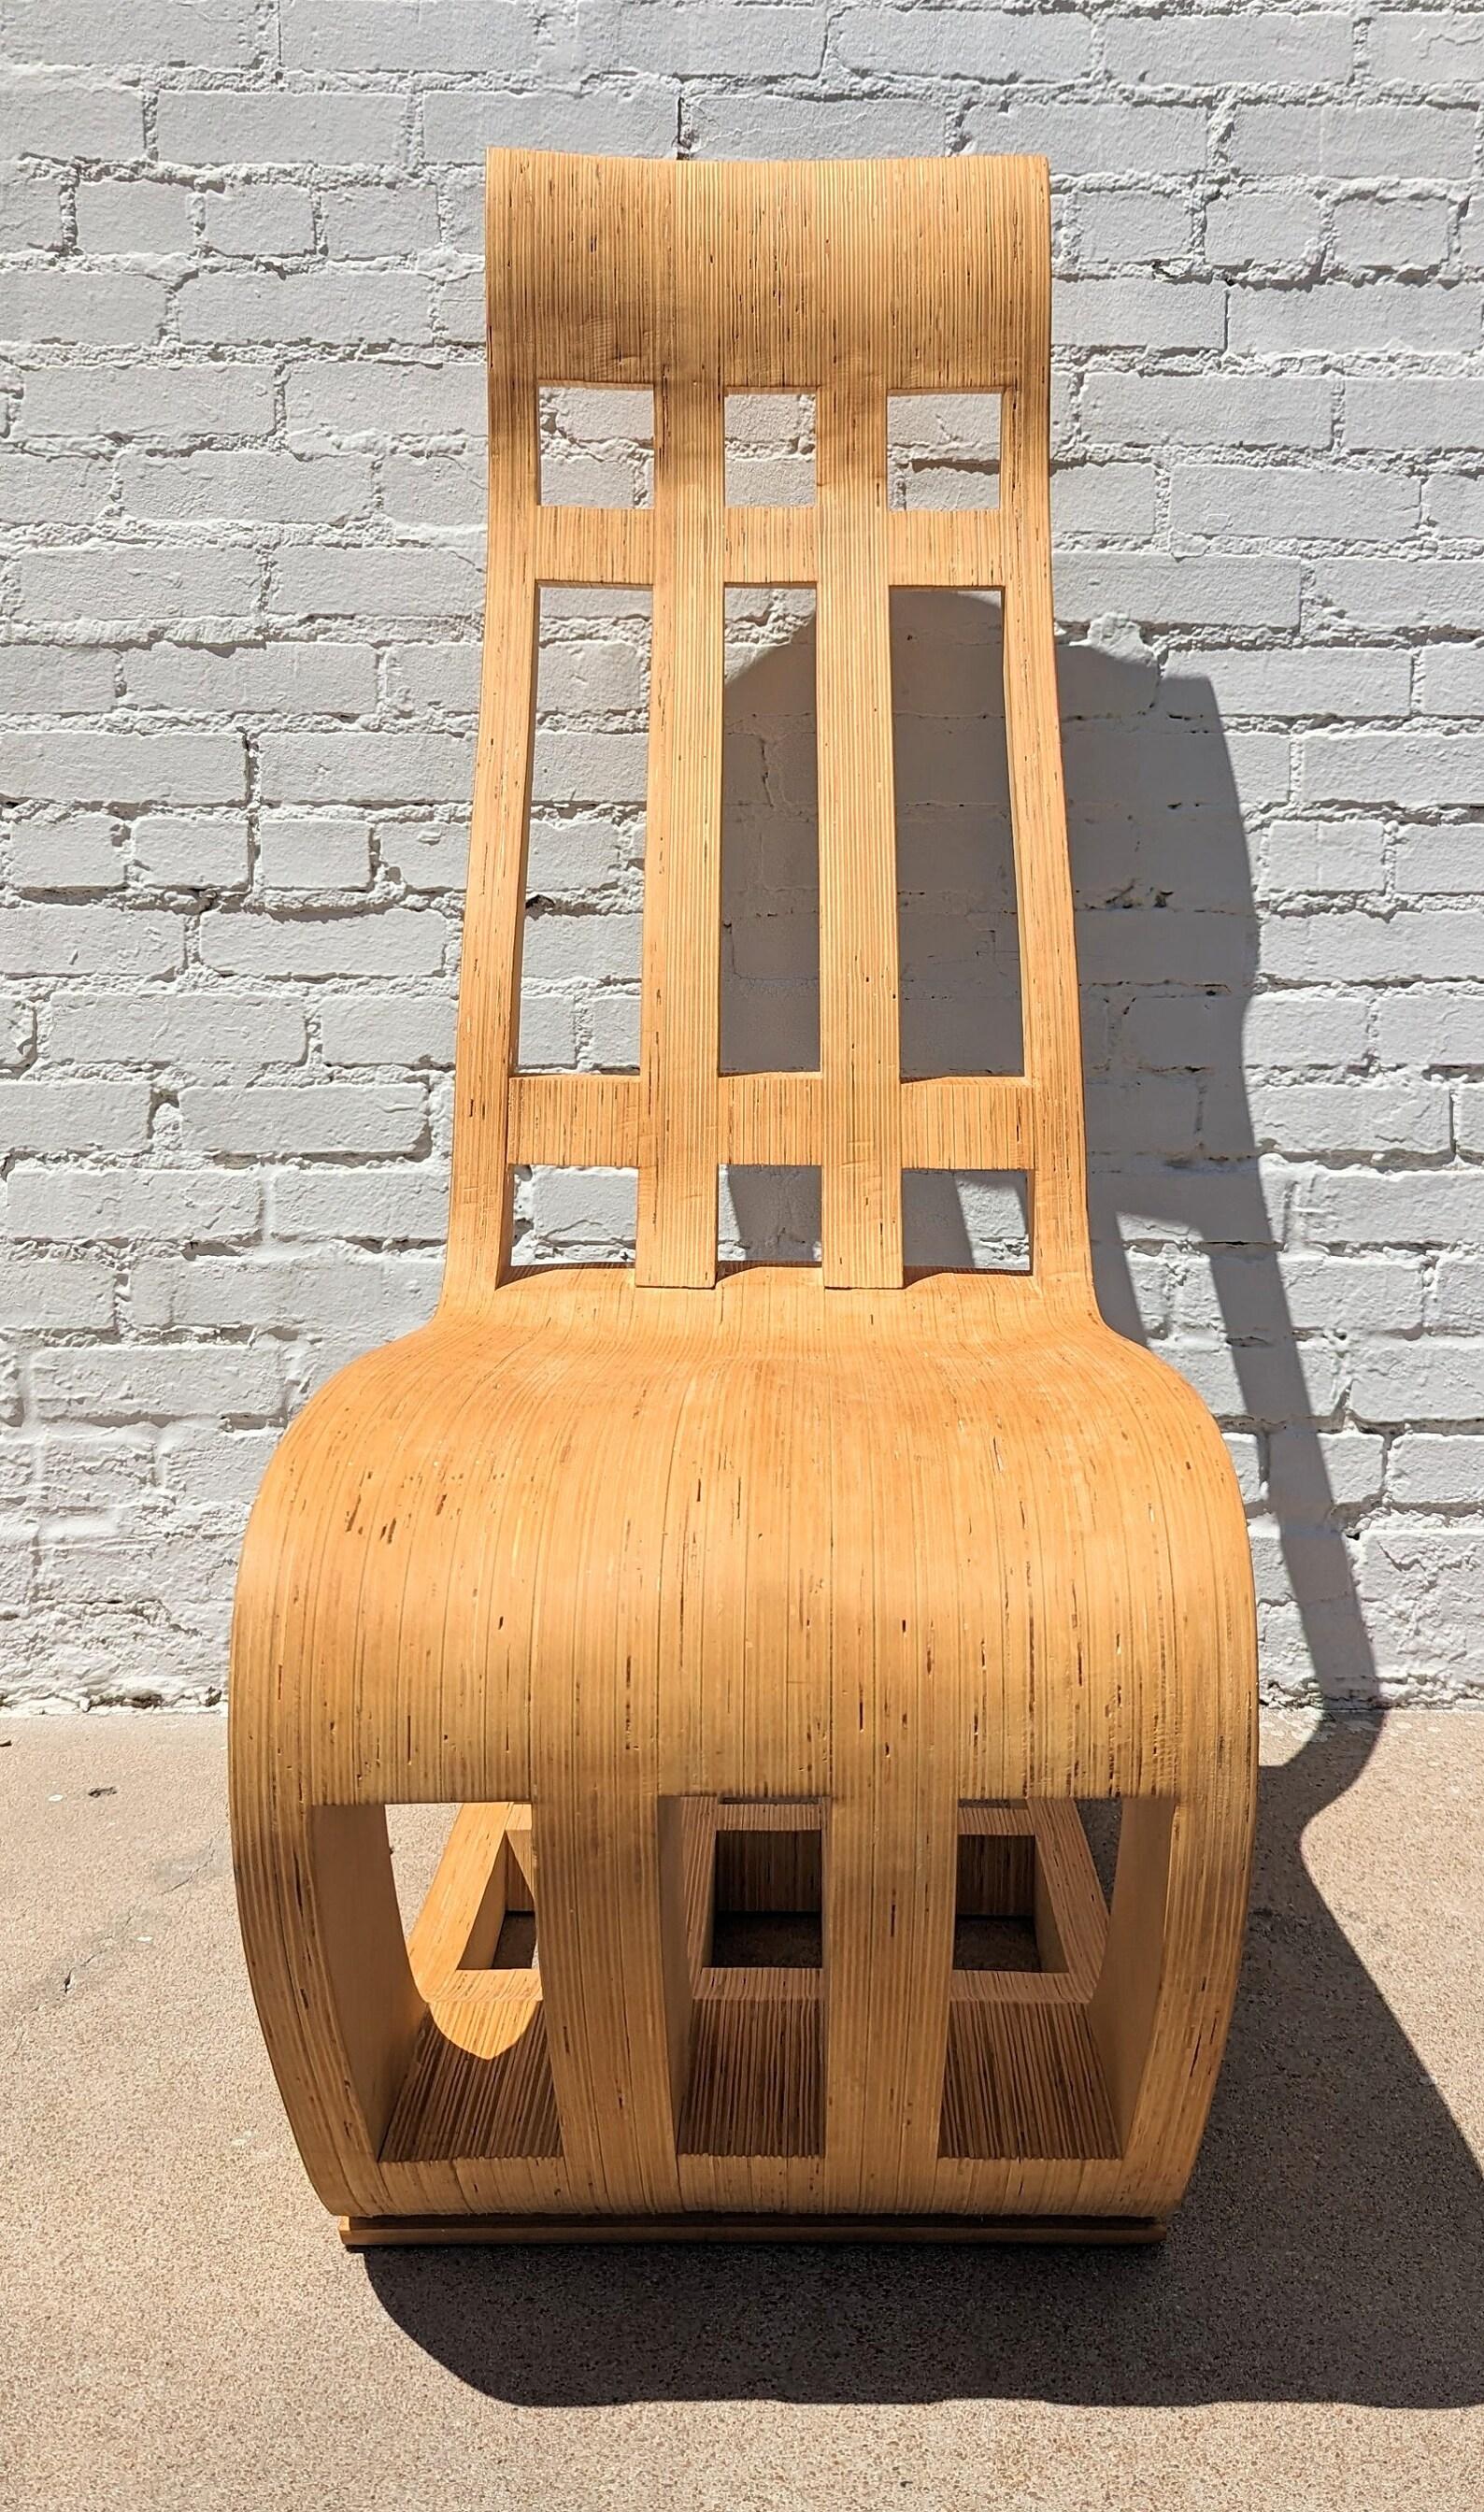 Mid Century Modern Style Custom Built Bentwood Chair

Very heavy and well made. Not the most comfortable chair but not meant to be a lounge chair but a conversation piece. Overall in very good condition.  Chip in one of the back legs. 

Additional